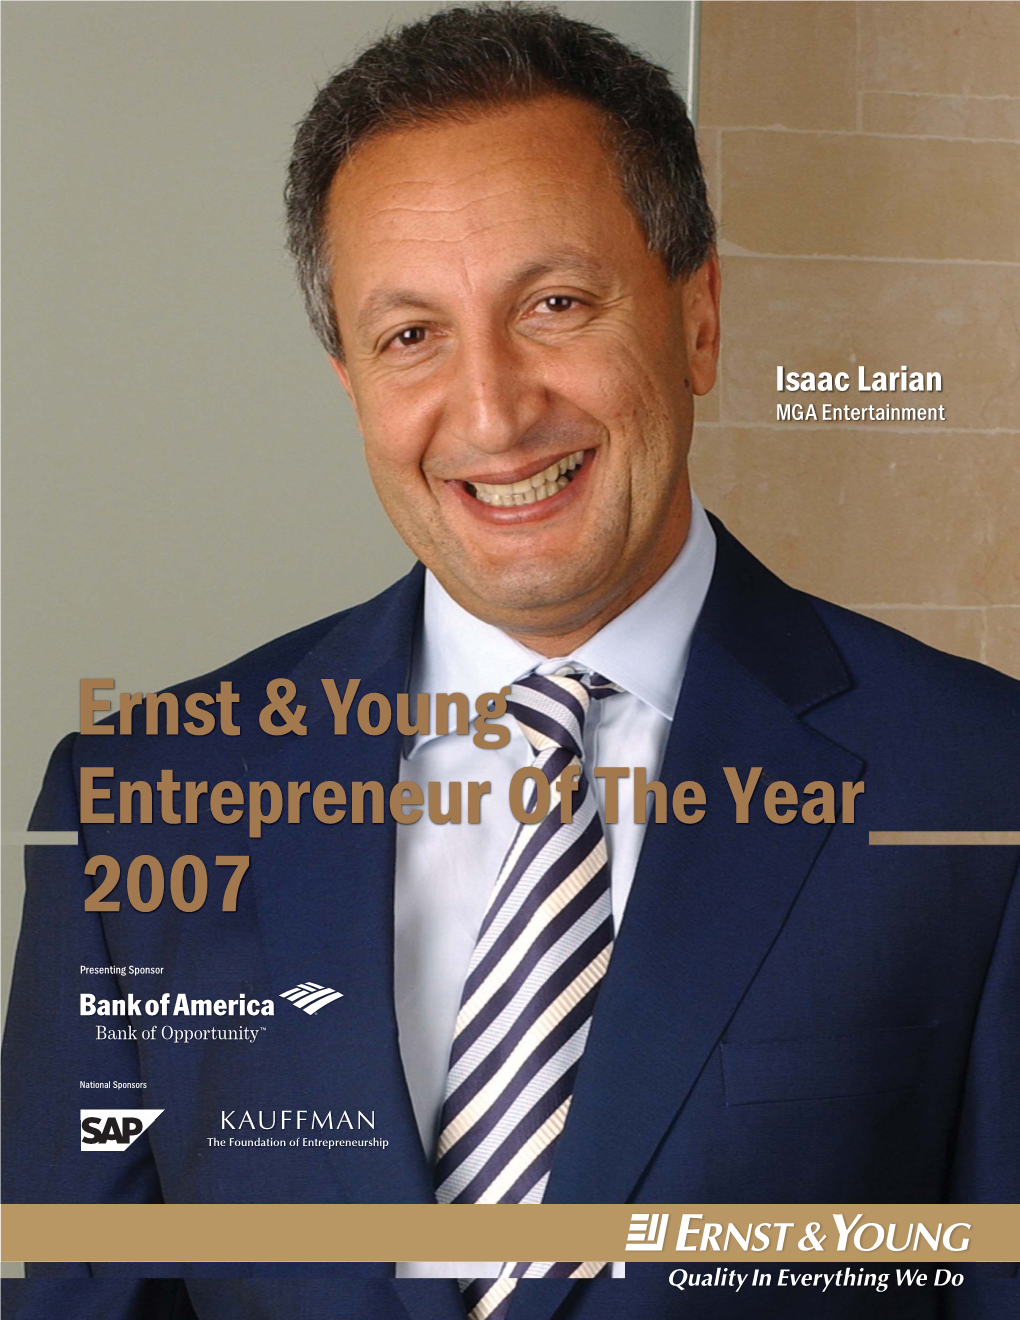 Ernst & Young Entrepreneur of the Year 2007